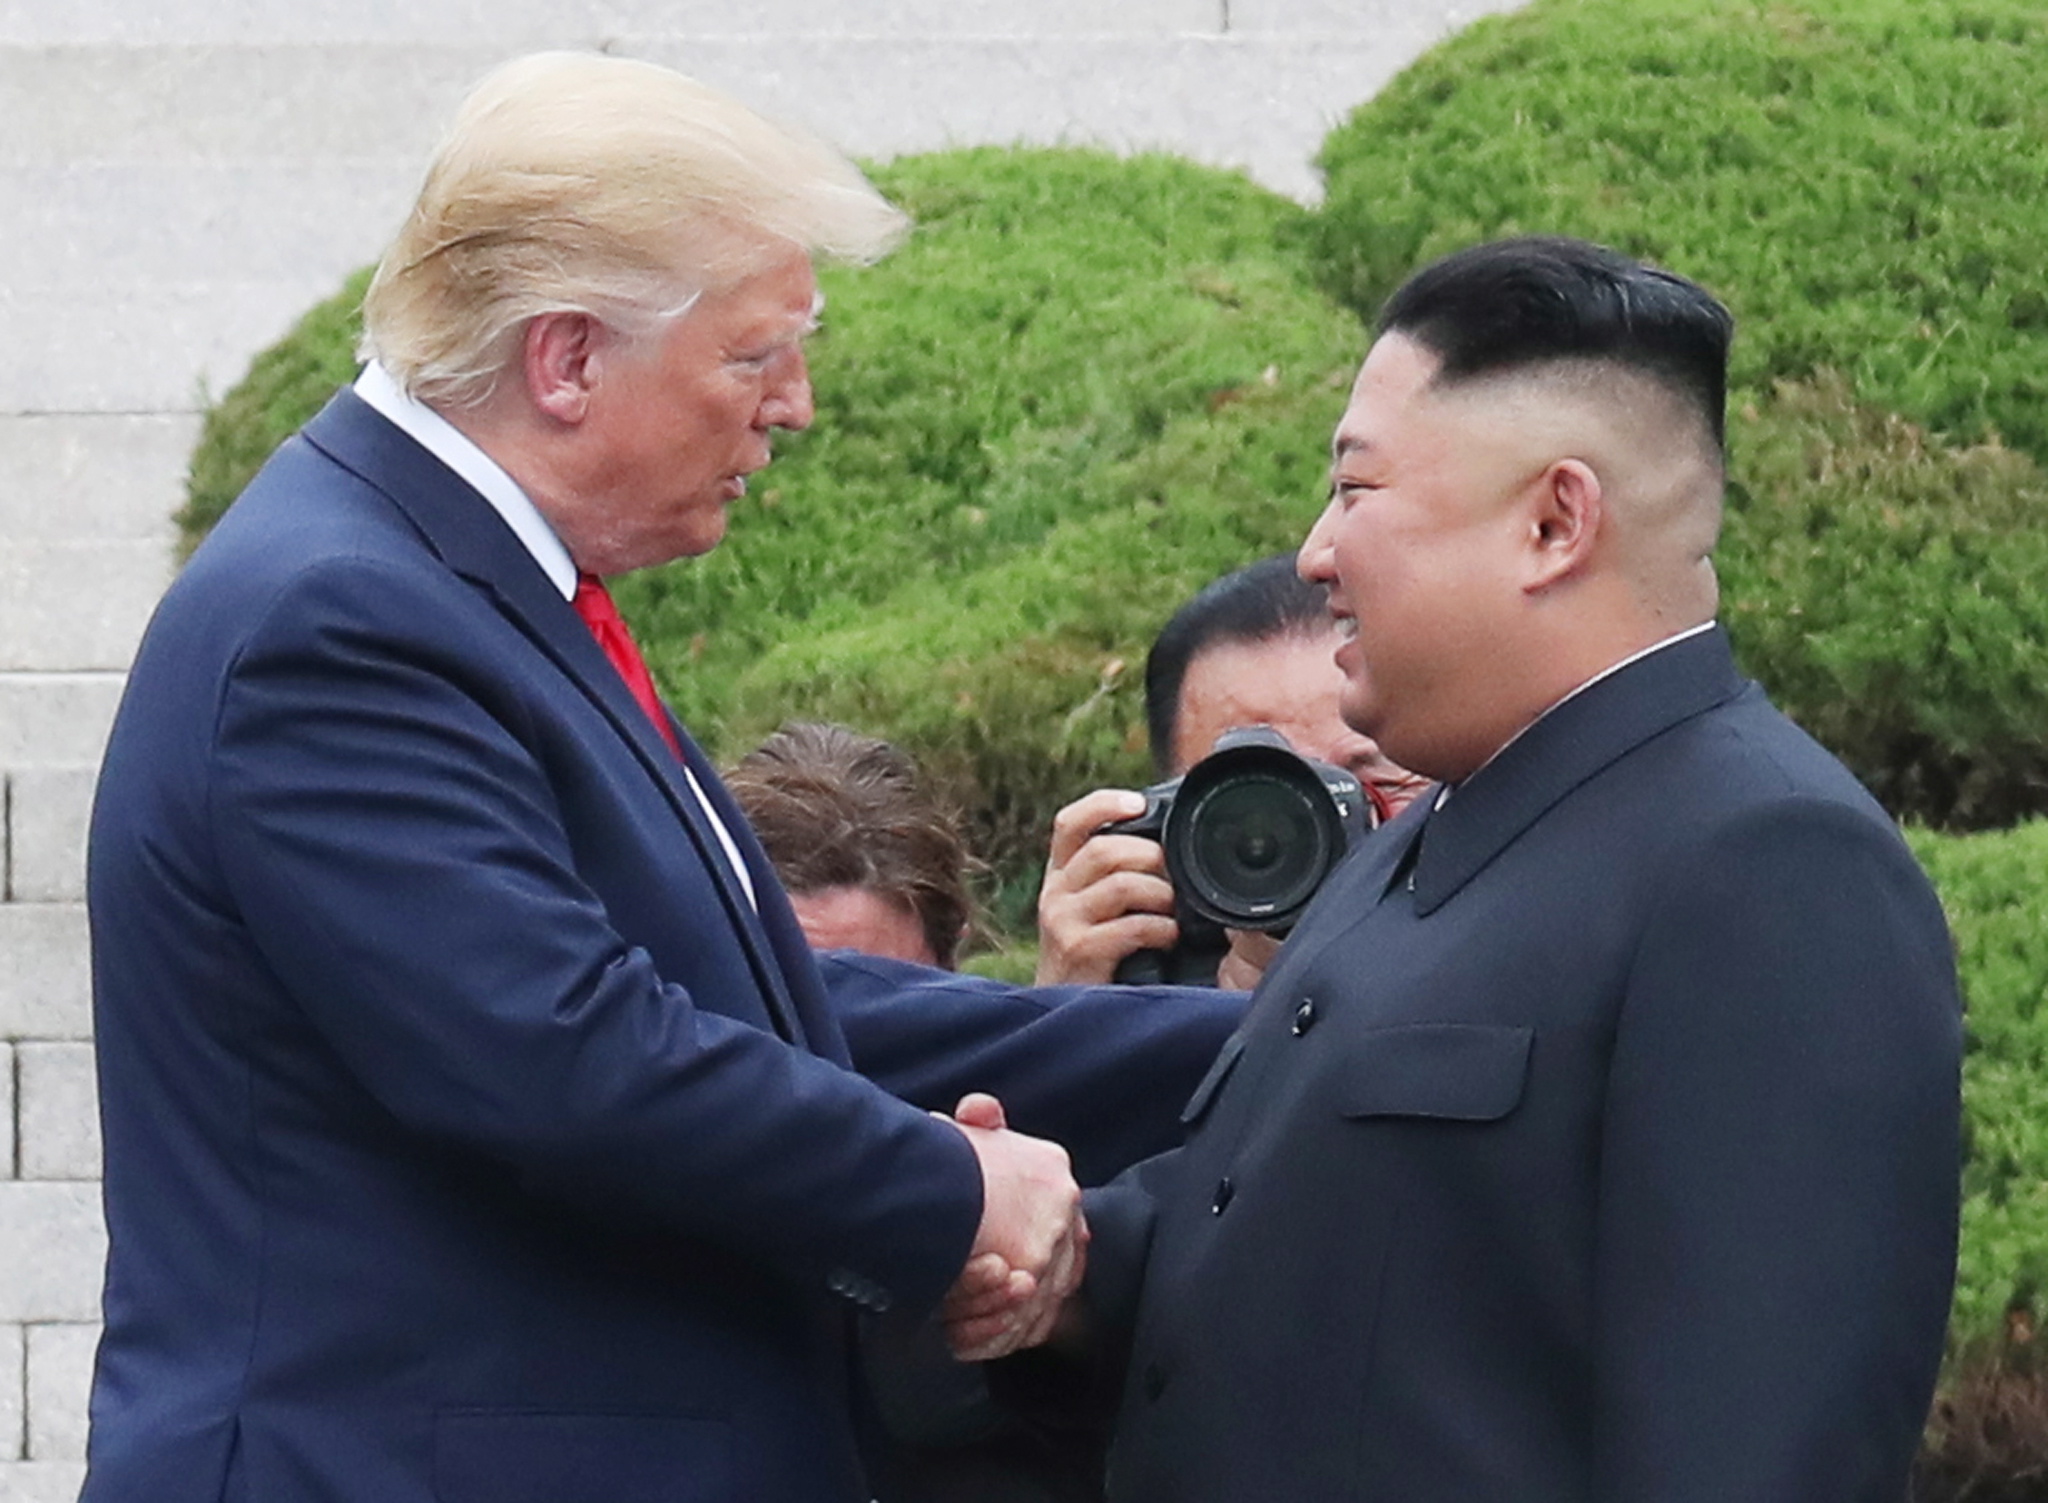 epa07683978 US President Donald J. Trump (L) with North Korean leader Kim Jong-un shake hands after crossing the Military Demarcation Line into the southern side of the truce village of Panmunjom in the Demilitarized Zone, which separates the two Koreas, 30 June 2019. The US leader arrived in South Korean on 29 June for a two-day visit that will include a meeting with South Korean President Moon Jae-in and a trip to the Demilitarized Zone.  EPA/YONHAP SOUTH KOREA OUT